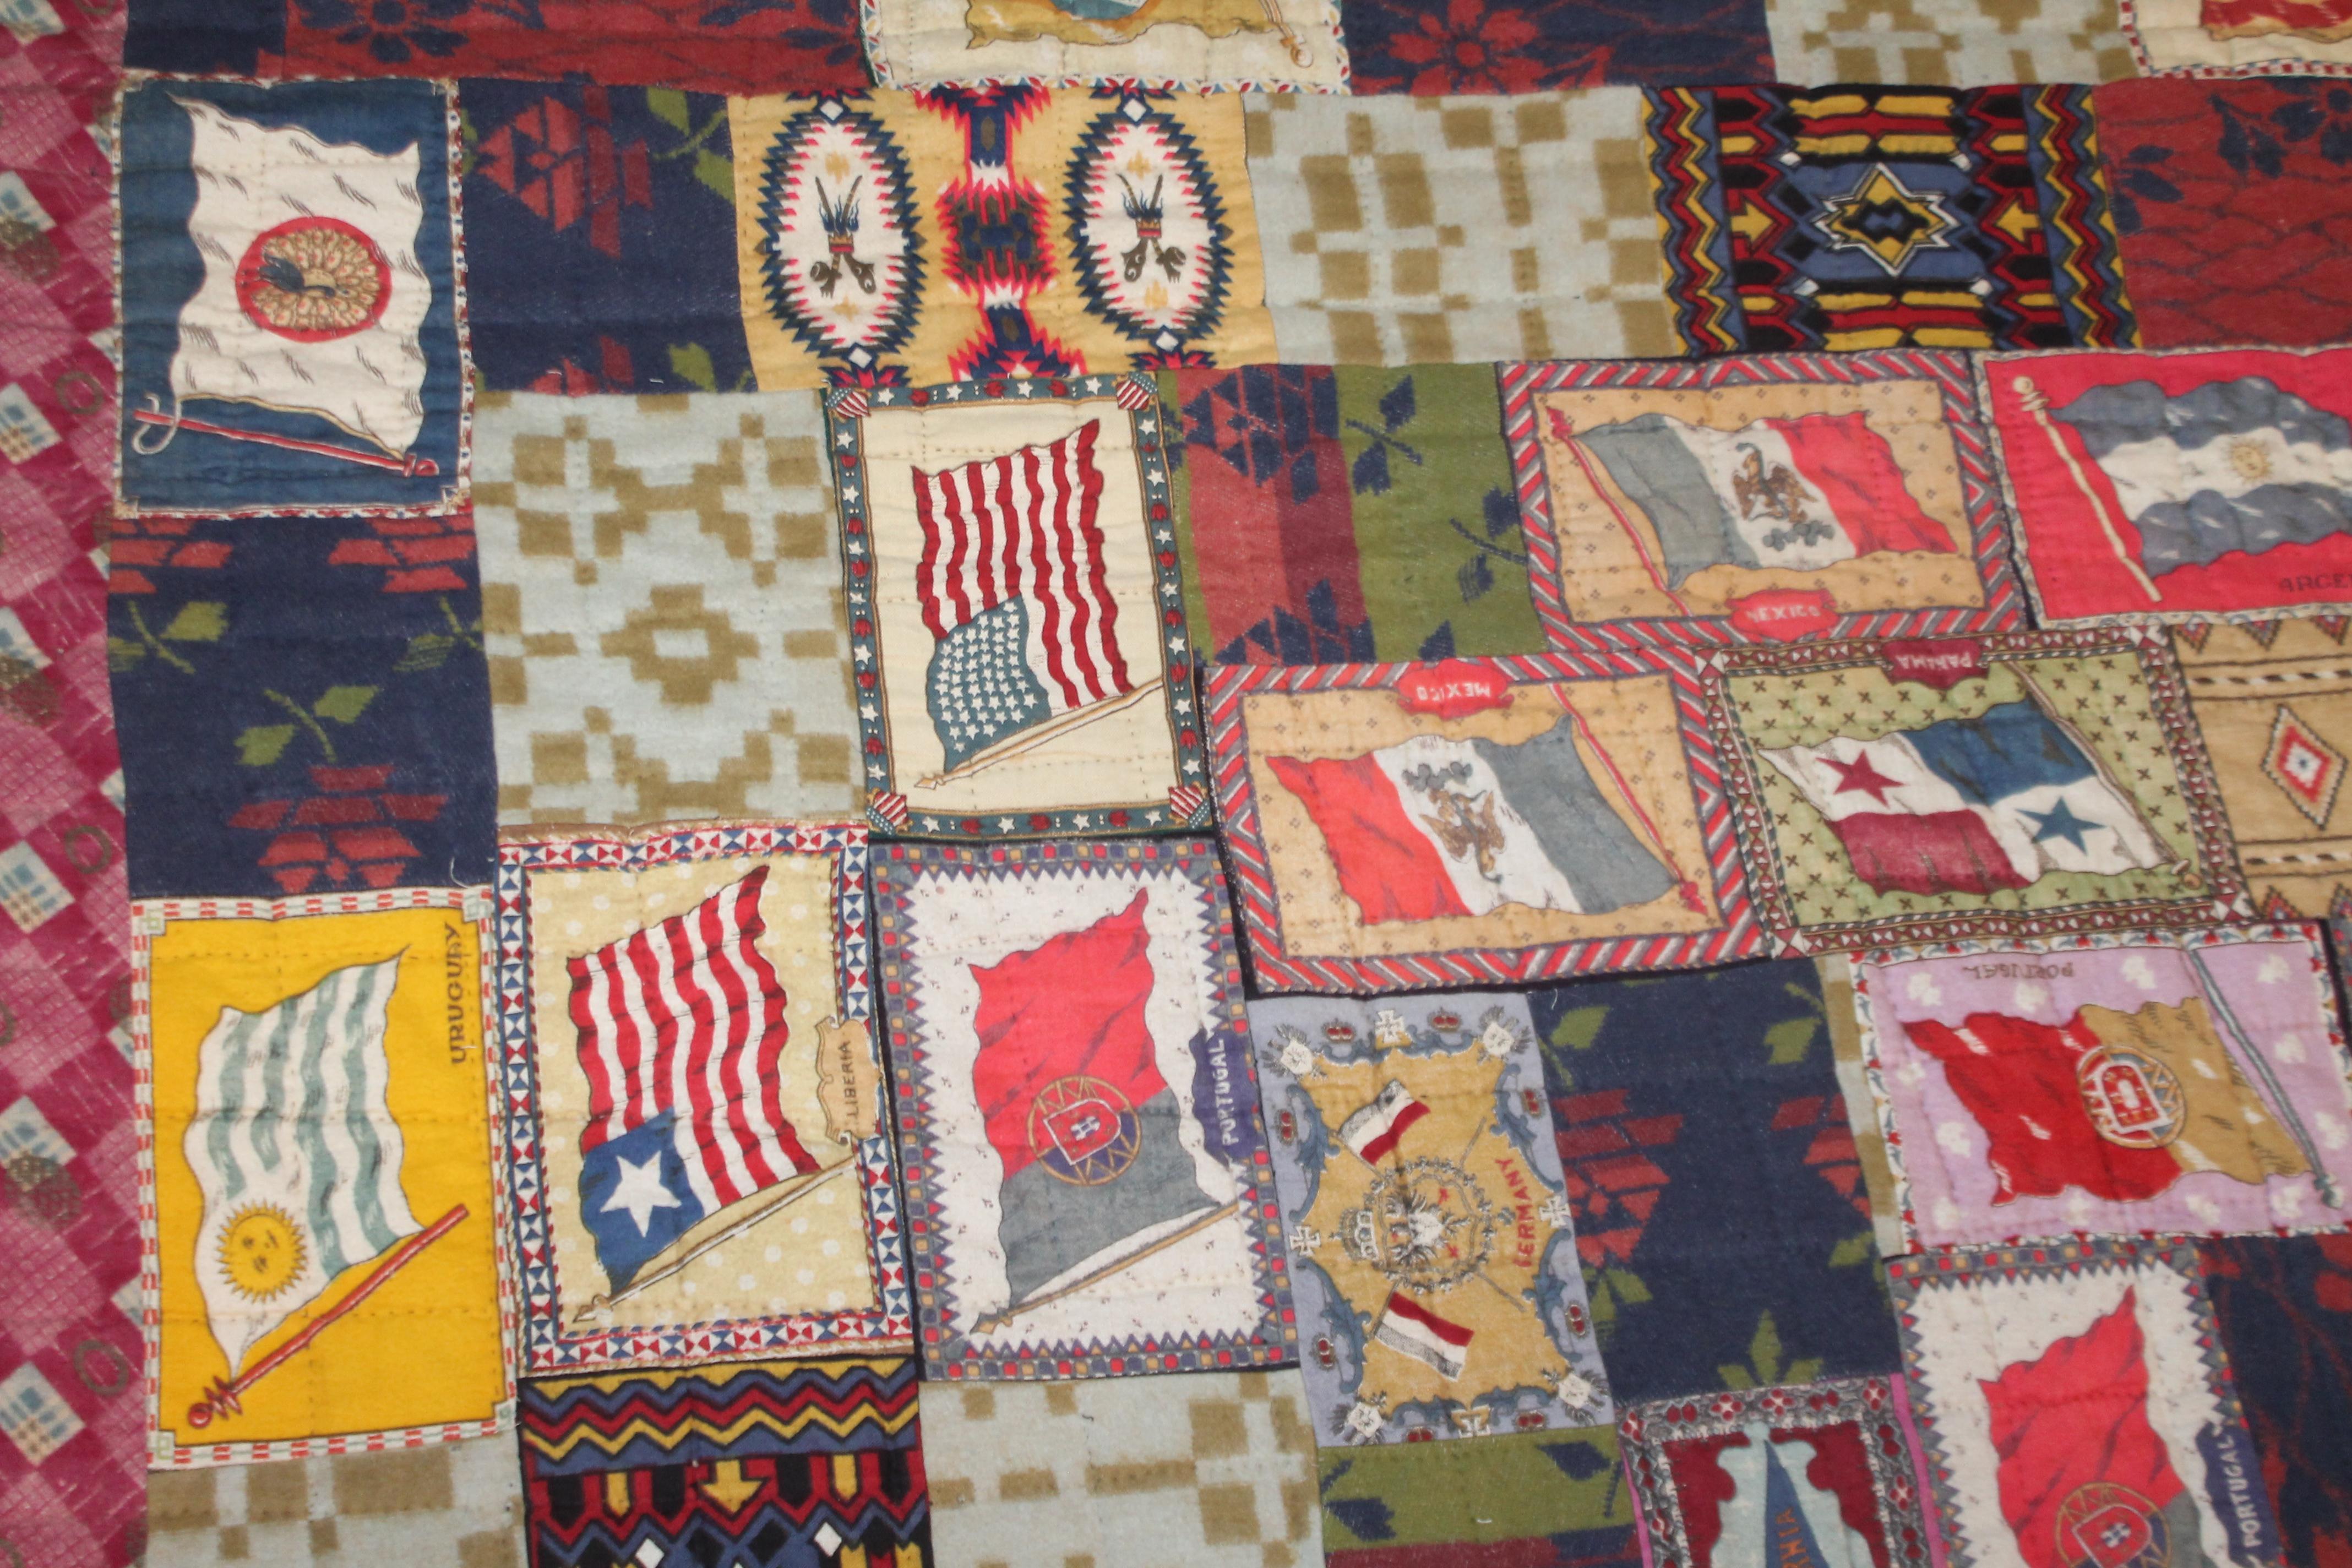 Hand-Crafted Multi-Country Flag Flannel Quilt with Indian Blanket Trim